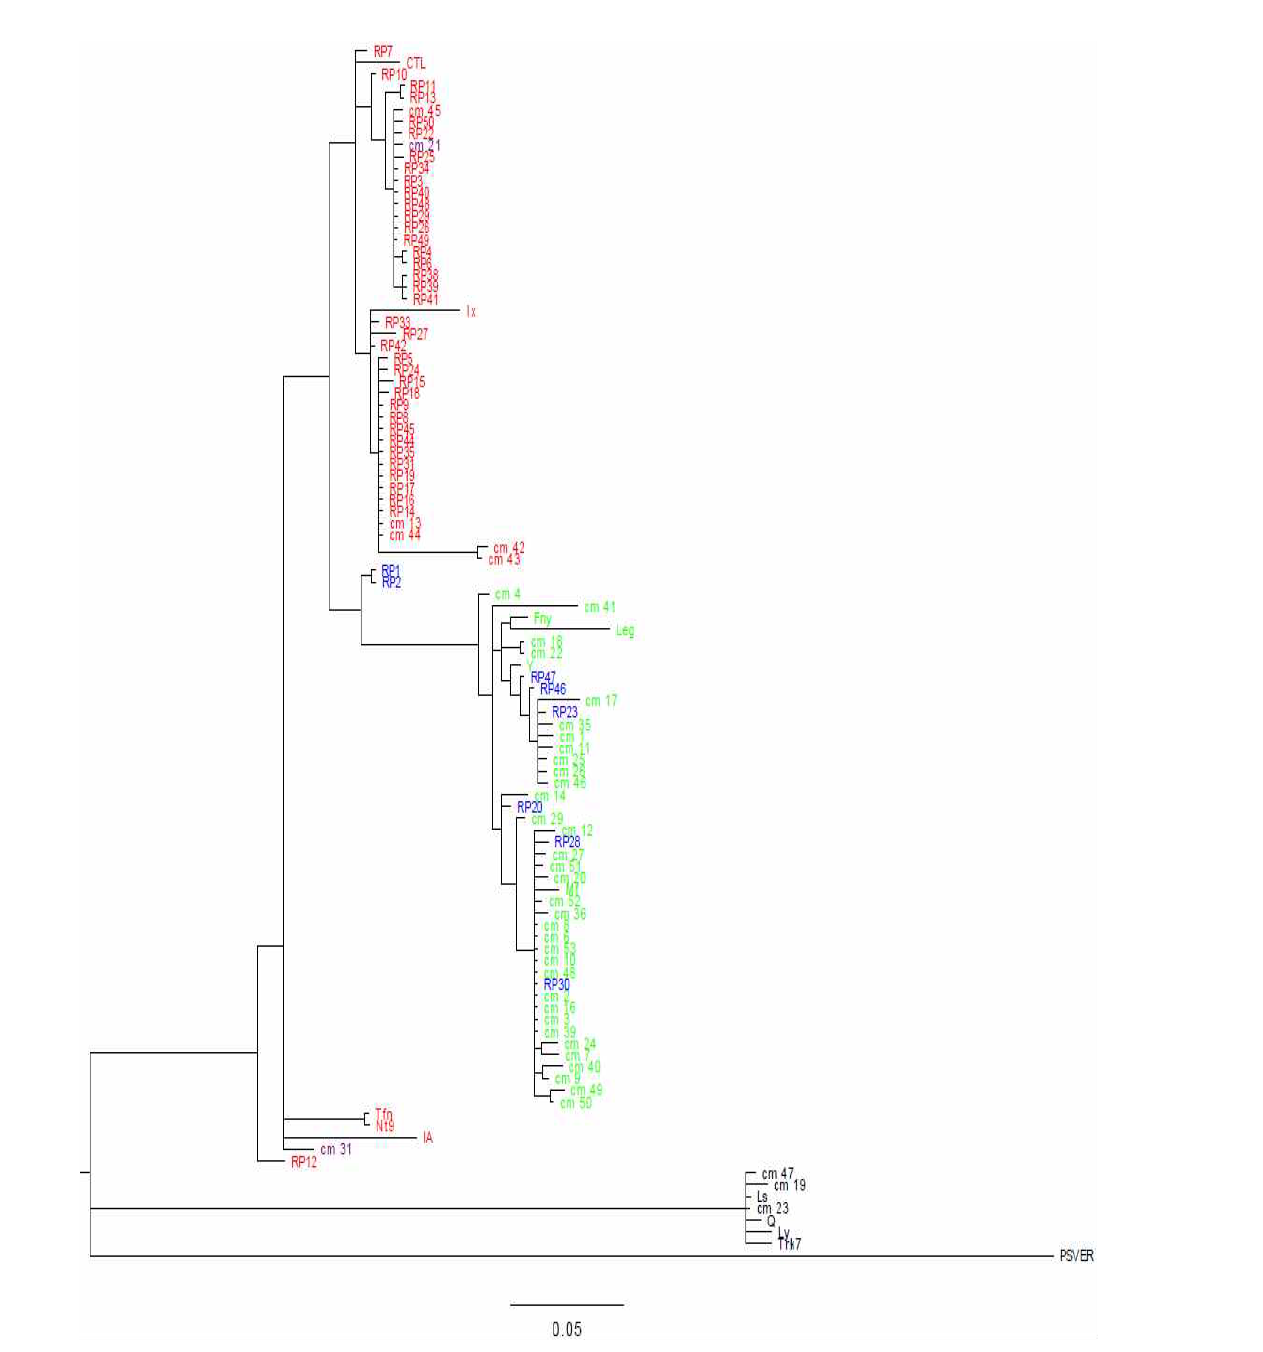 MrBayes phylogenetic trees of CMV isolates based on 2b gene. CMV subgroups are direentiated by colors: Subgroup I, red and green; Subgroup II, black including outgroup of PSV. Reassortants have two colors, blue and skyblue.